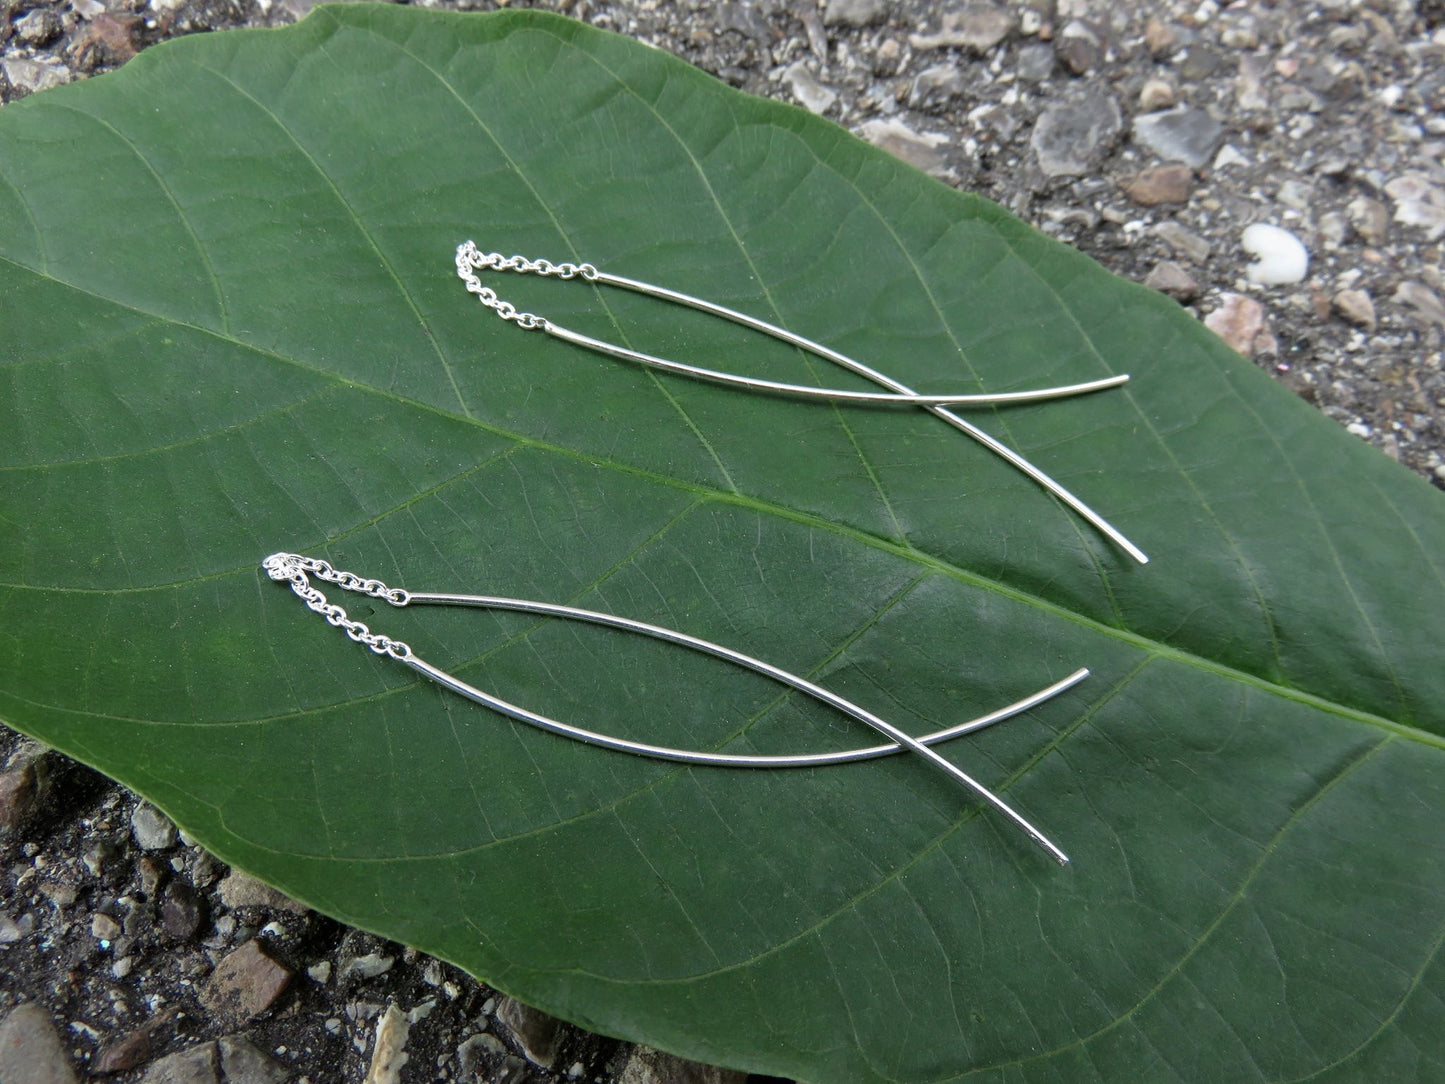 Earrings with chain and dangling silver pins 